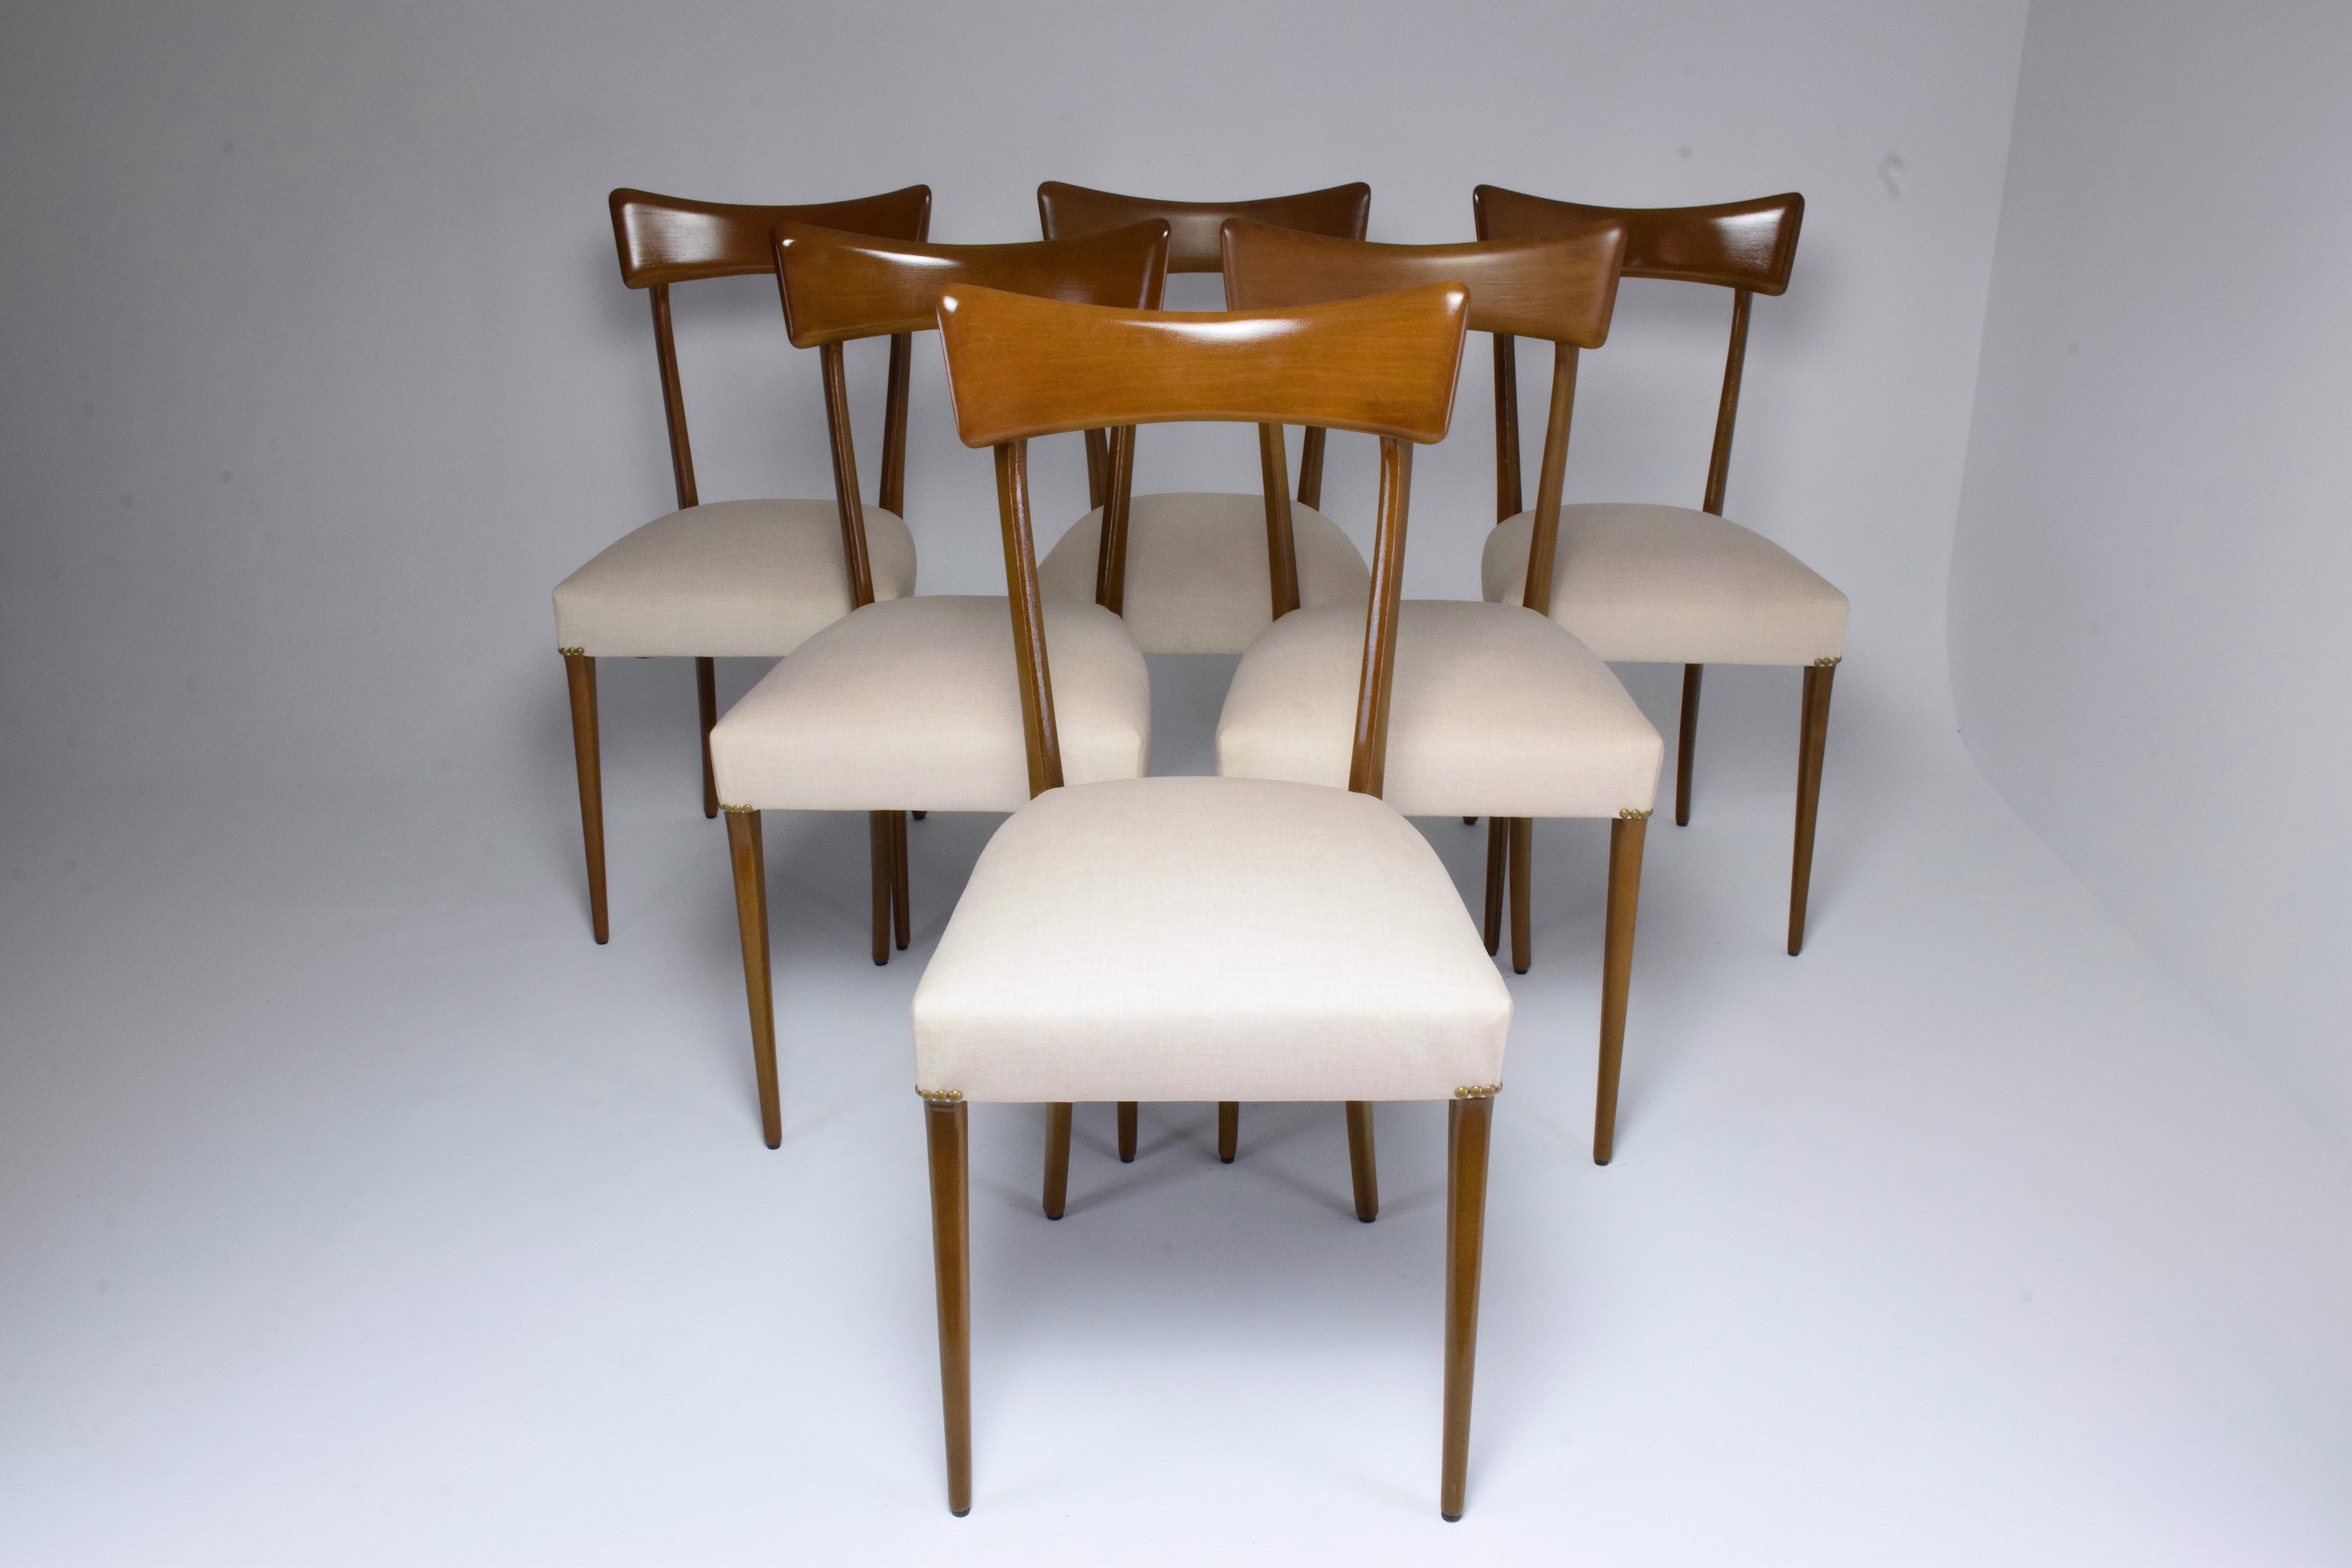 20th century vintage set of six Italian dining chairs in Ico Parisi style circa 1950s. The backrest is designed with a striking curved panel and structure highlighting timeless modernity. 

Fully restored through re-finishing and re-upholstered